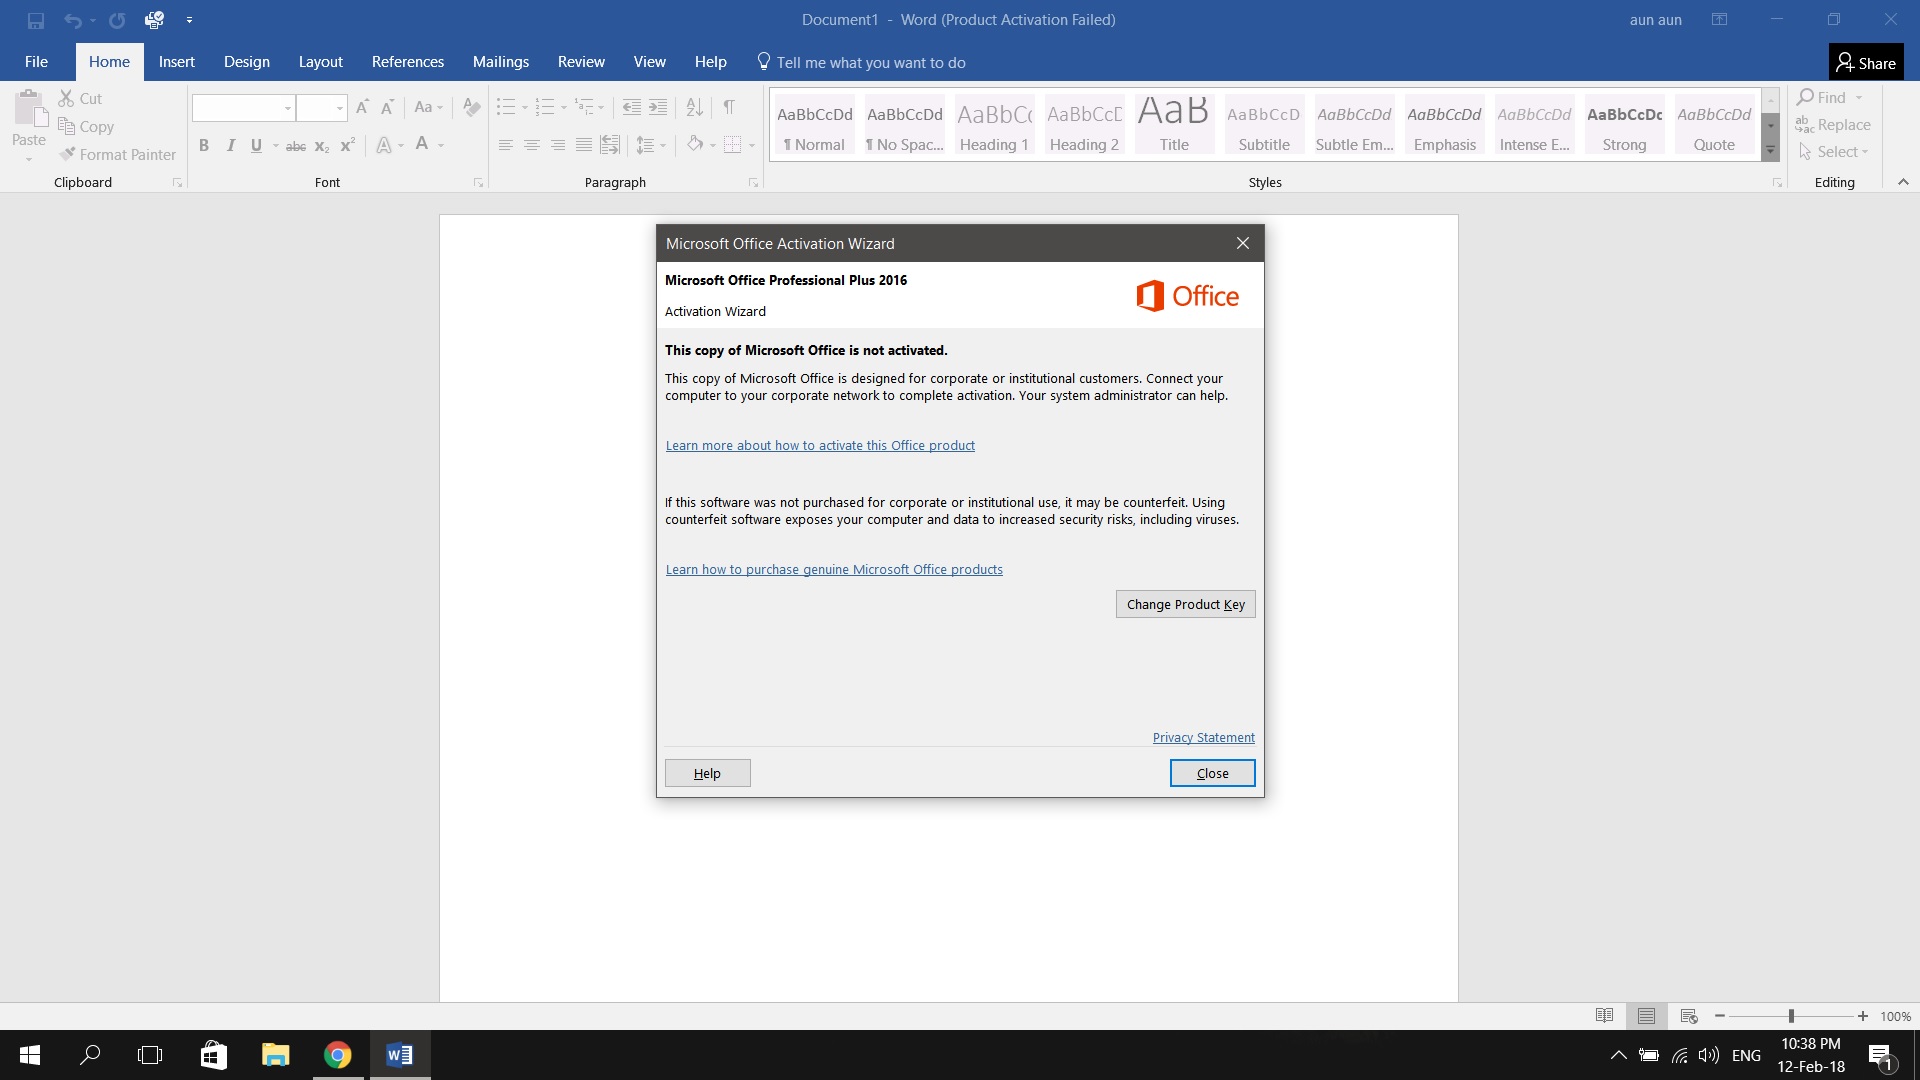 microsoft office product activation failed what happens